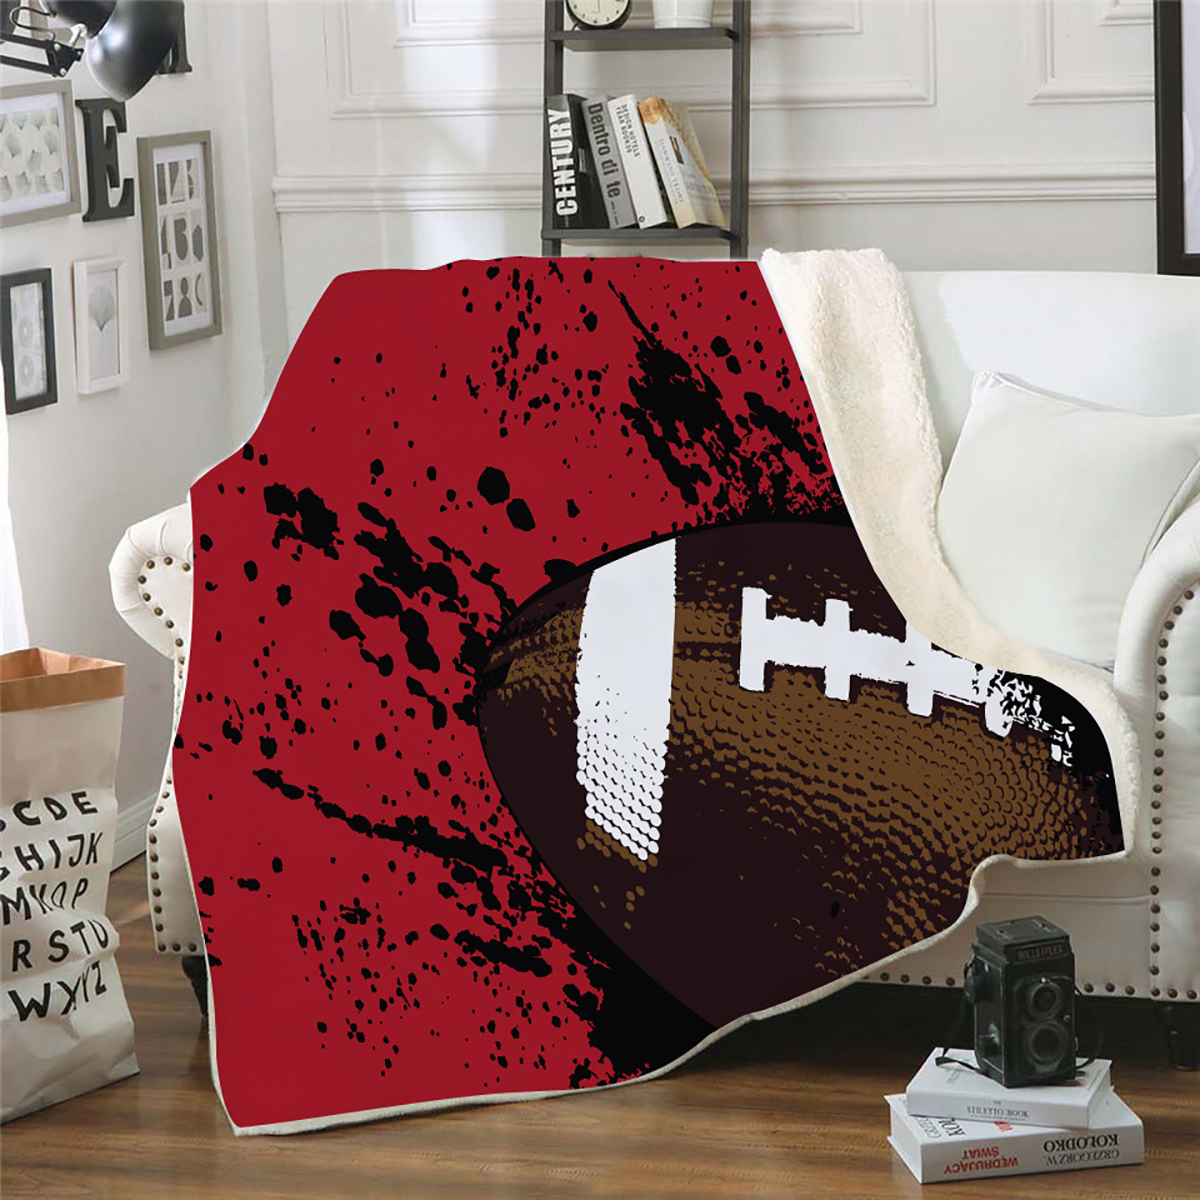 Double-Thicken-Blanket-3D-Digital-Printing-Blanket-Fugby-Series-Sofa-Cover-Rugby-Cartoon-Bedding-1924765-4